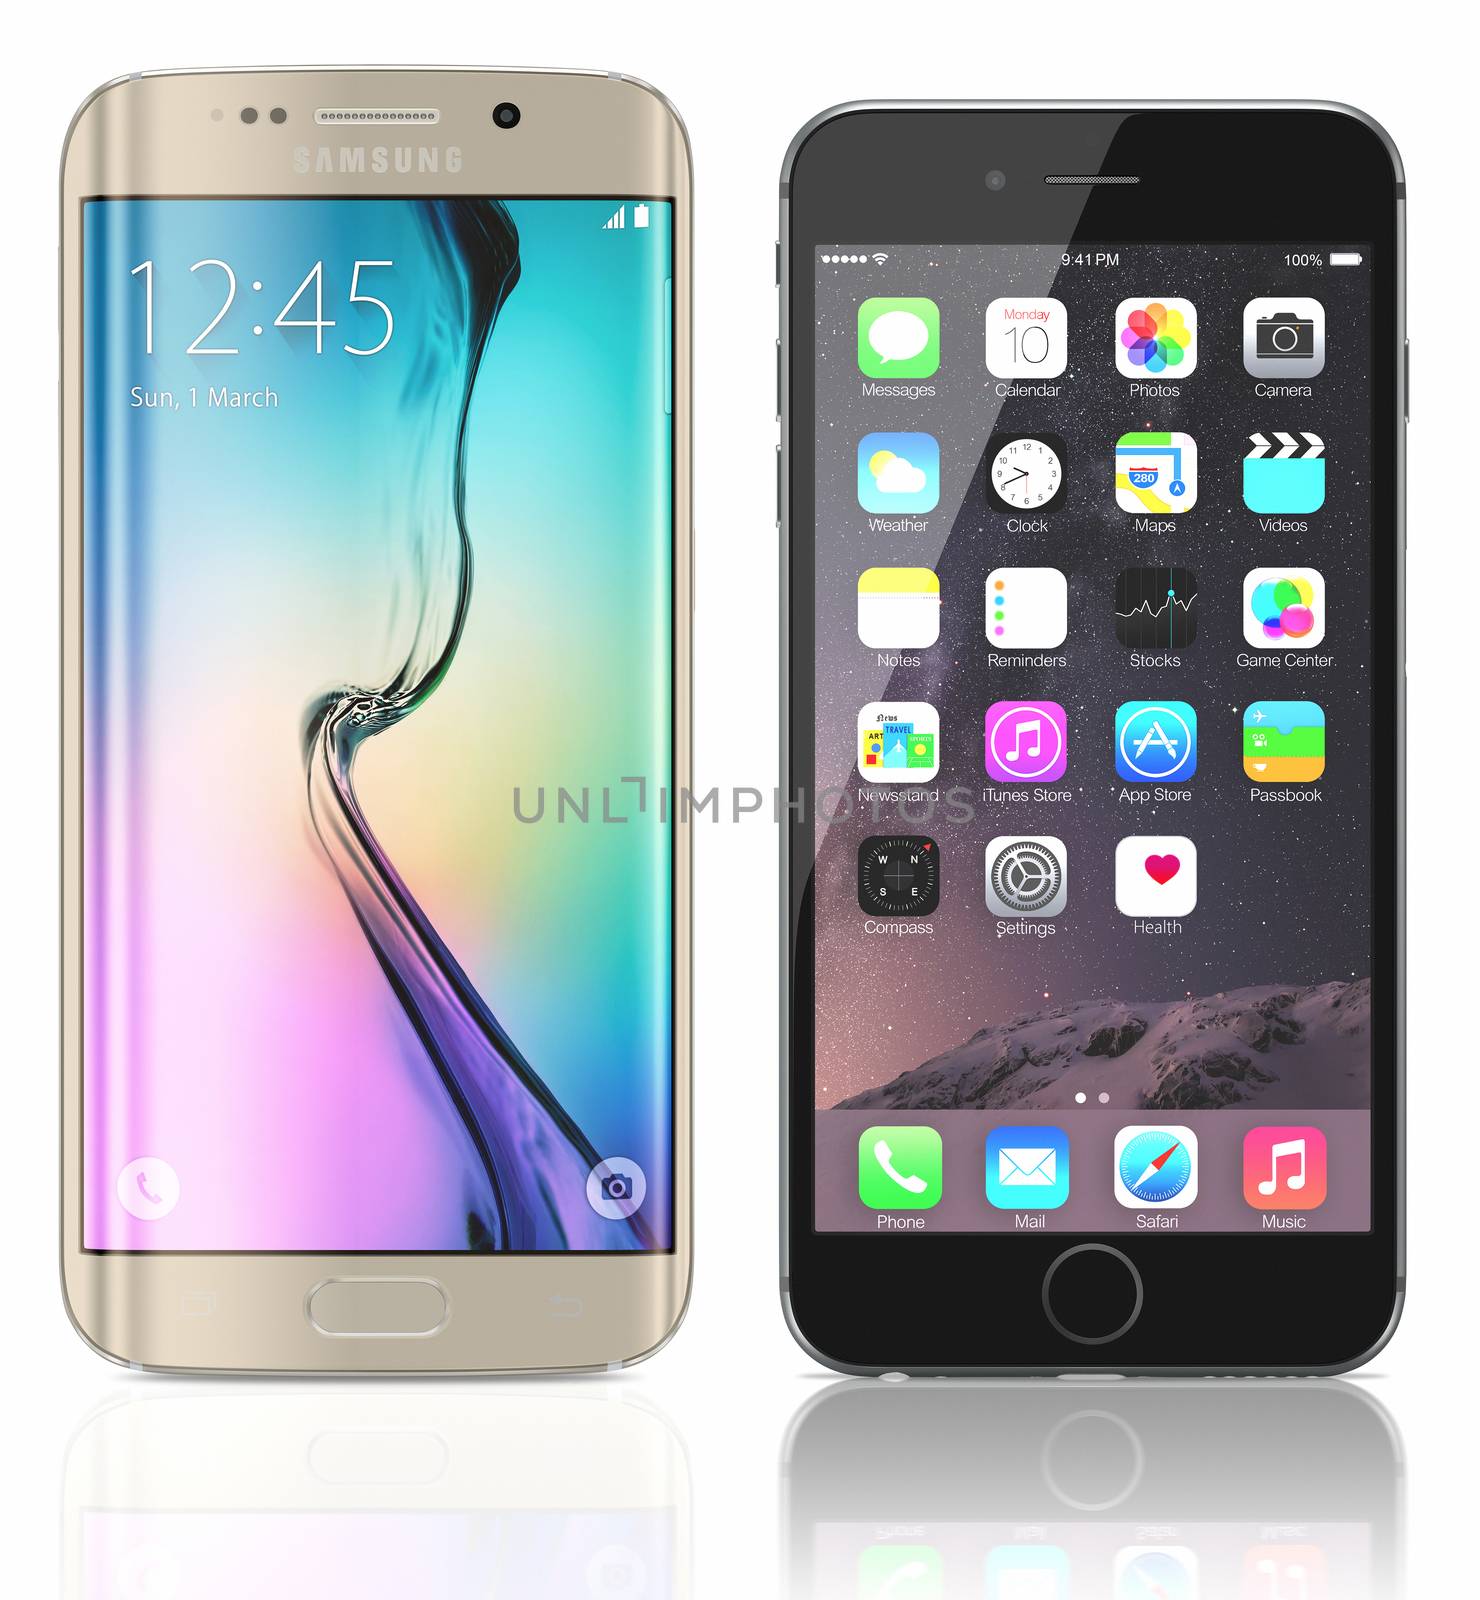 Gold Platinum Samsung Galaxy S6 Edge and Space Gray Apple iPhone by manaemedia